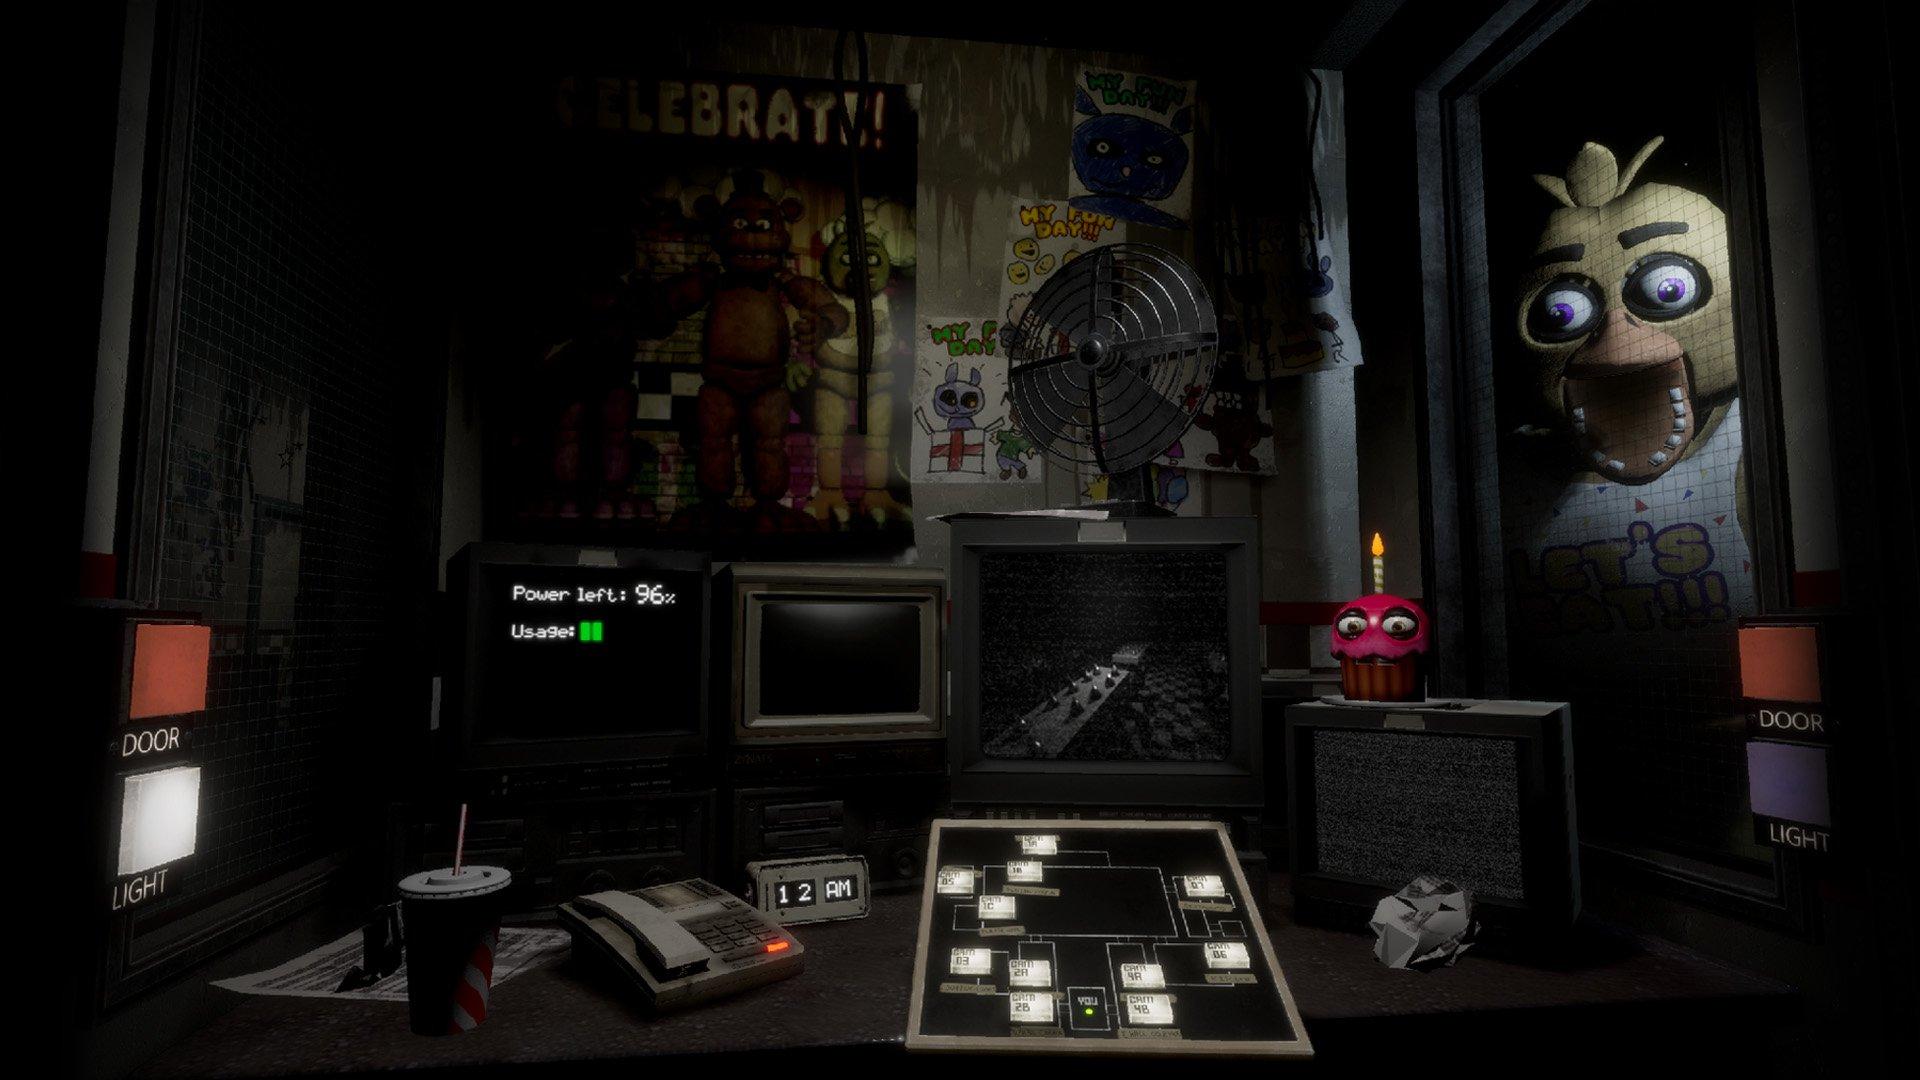 FNaF VR Help Wanted is STILL TERRIFYING in 2023 (Full Game) 